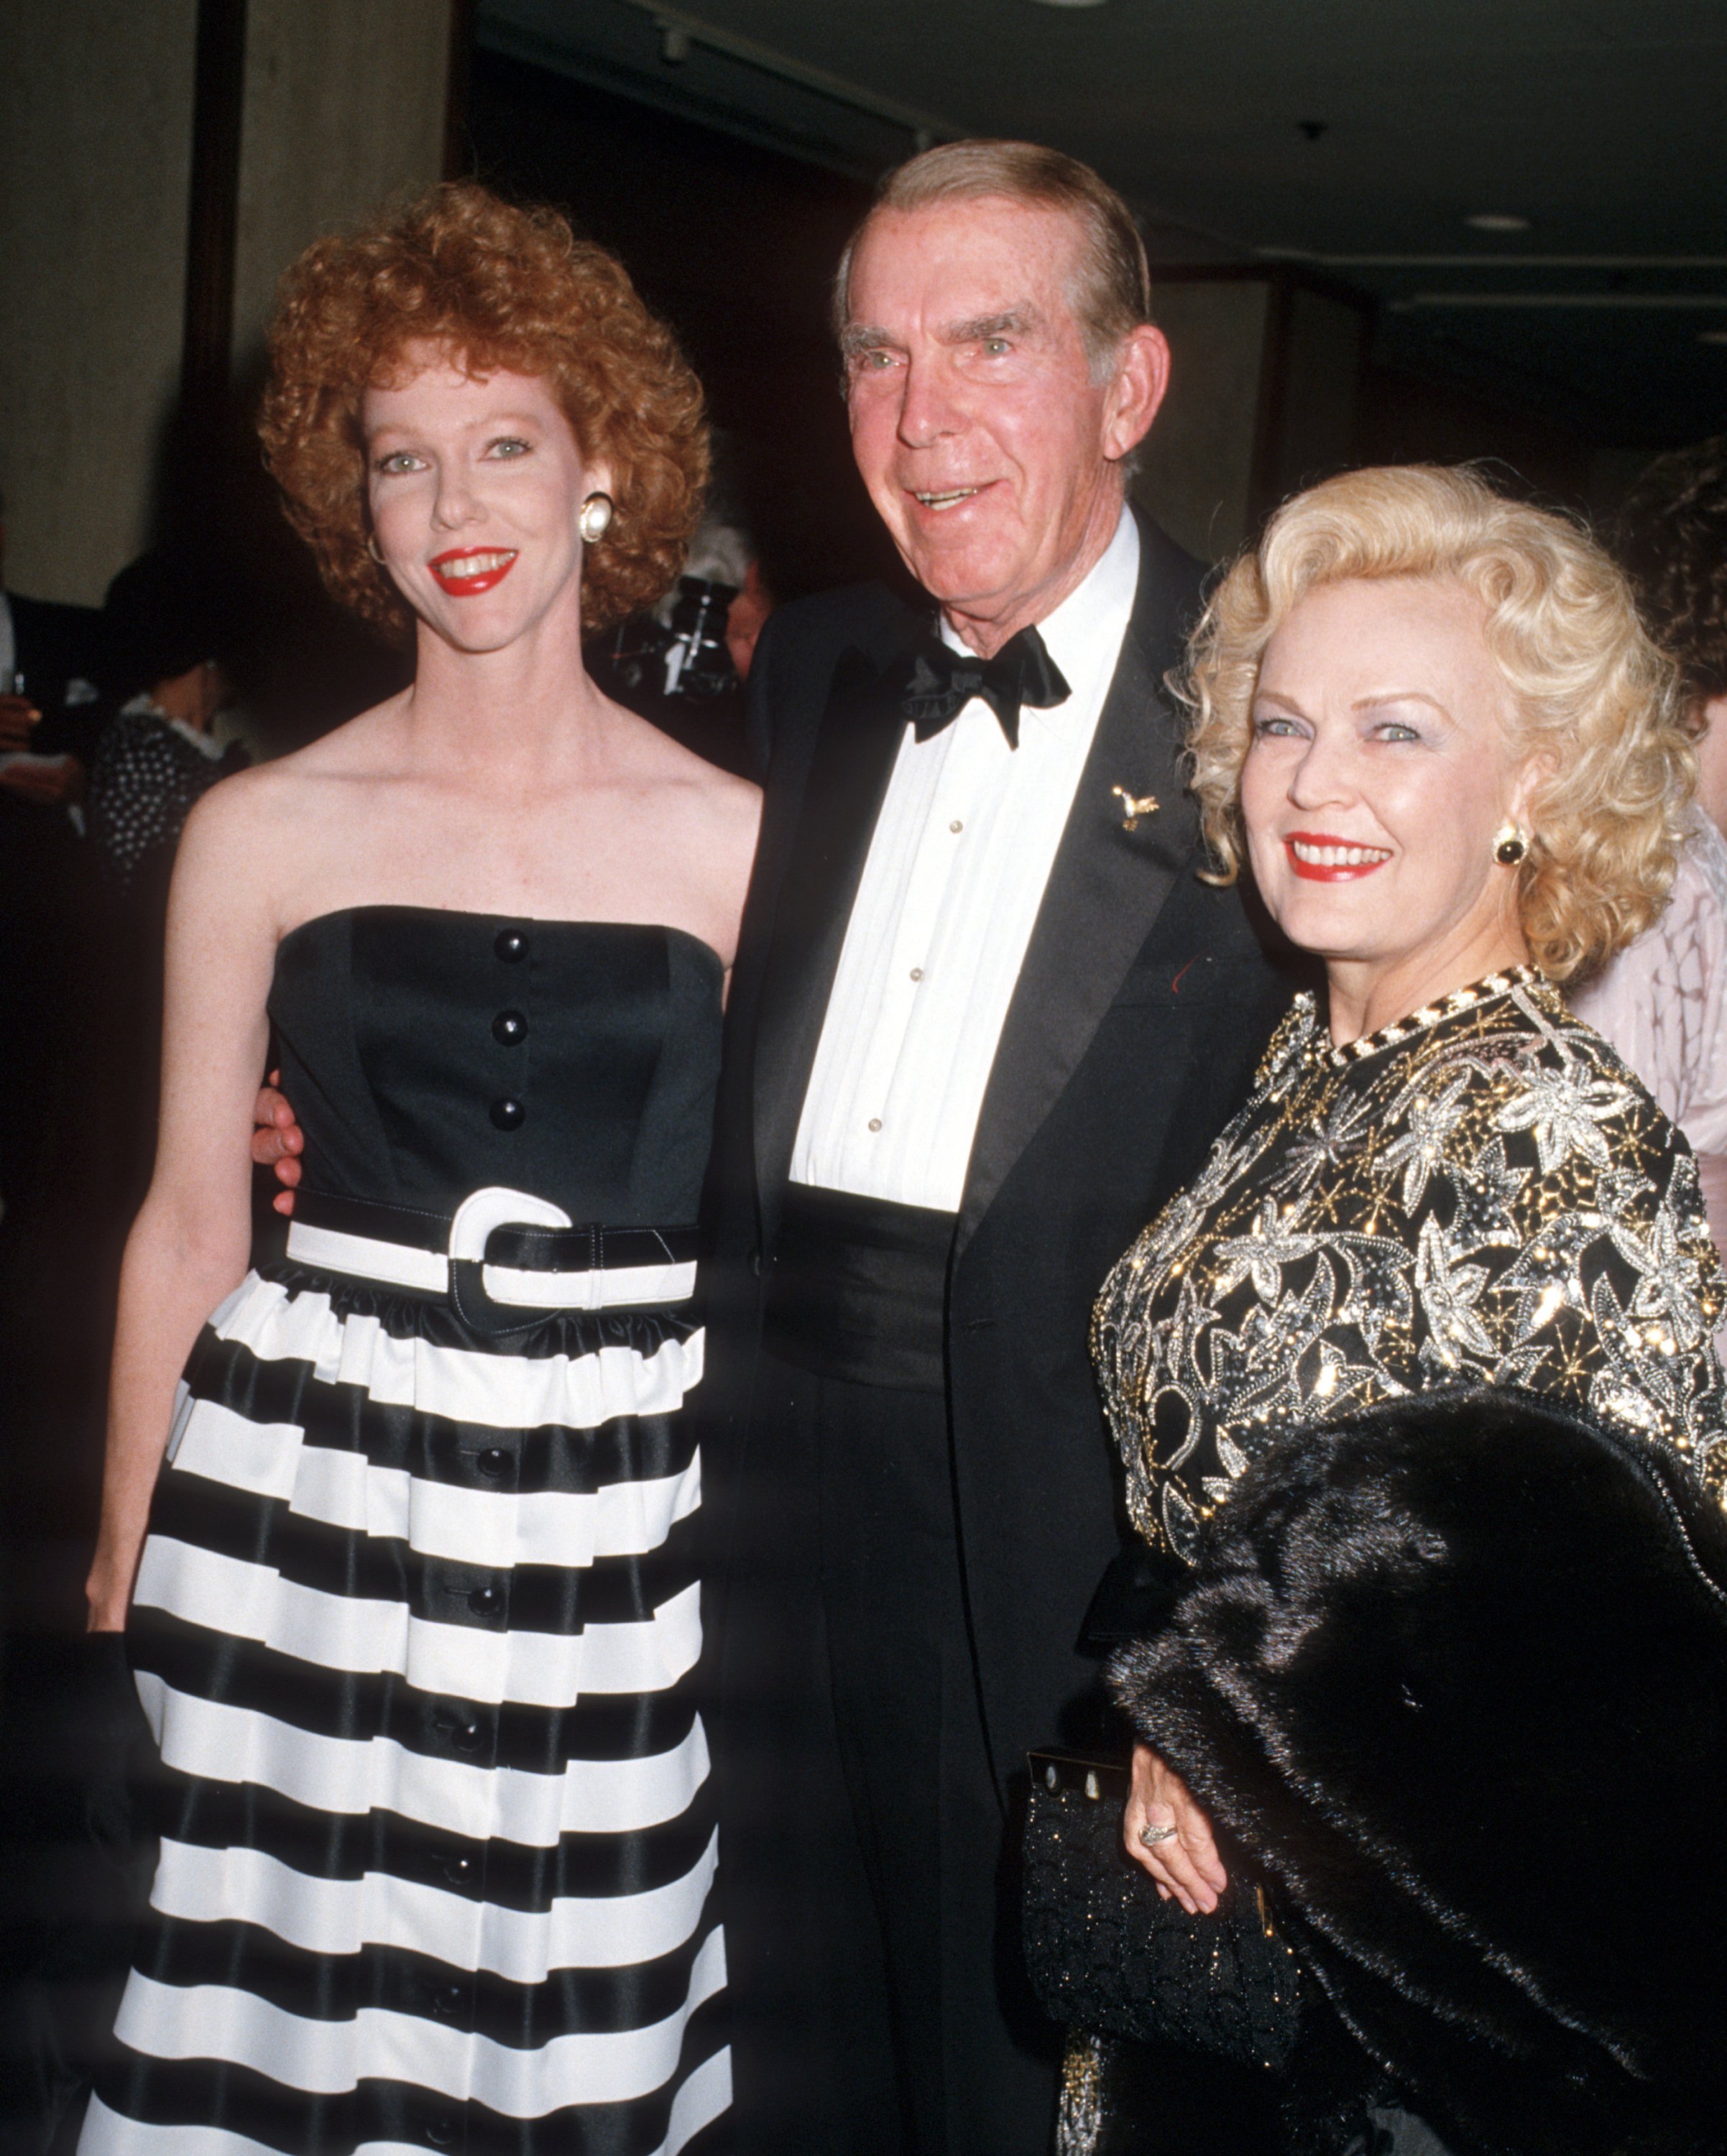 Fred MacMurray, June Haver, and Daughter during Heritage Museum Gala - February 21, 1987, at Century Plaza Hotel in Century City, California, United States. | Source: Getty Images